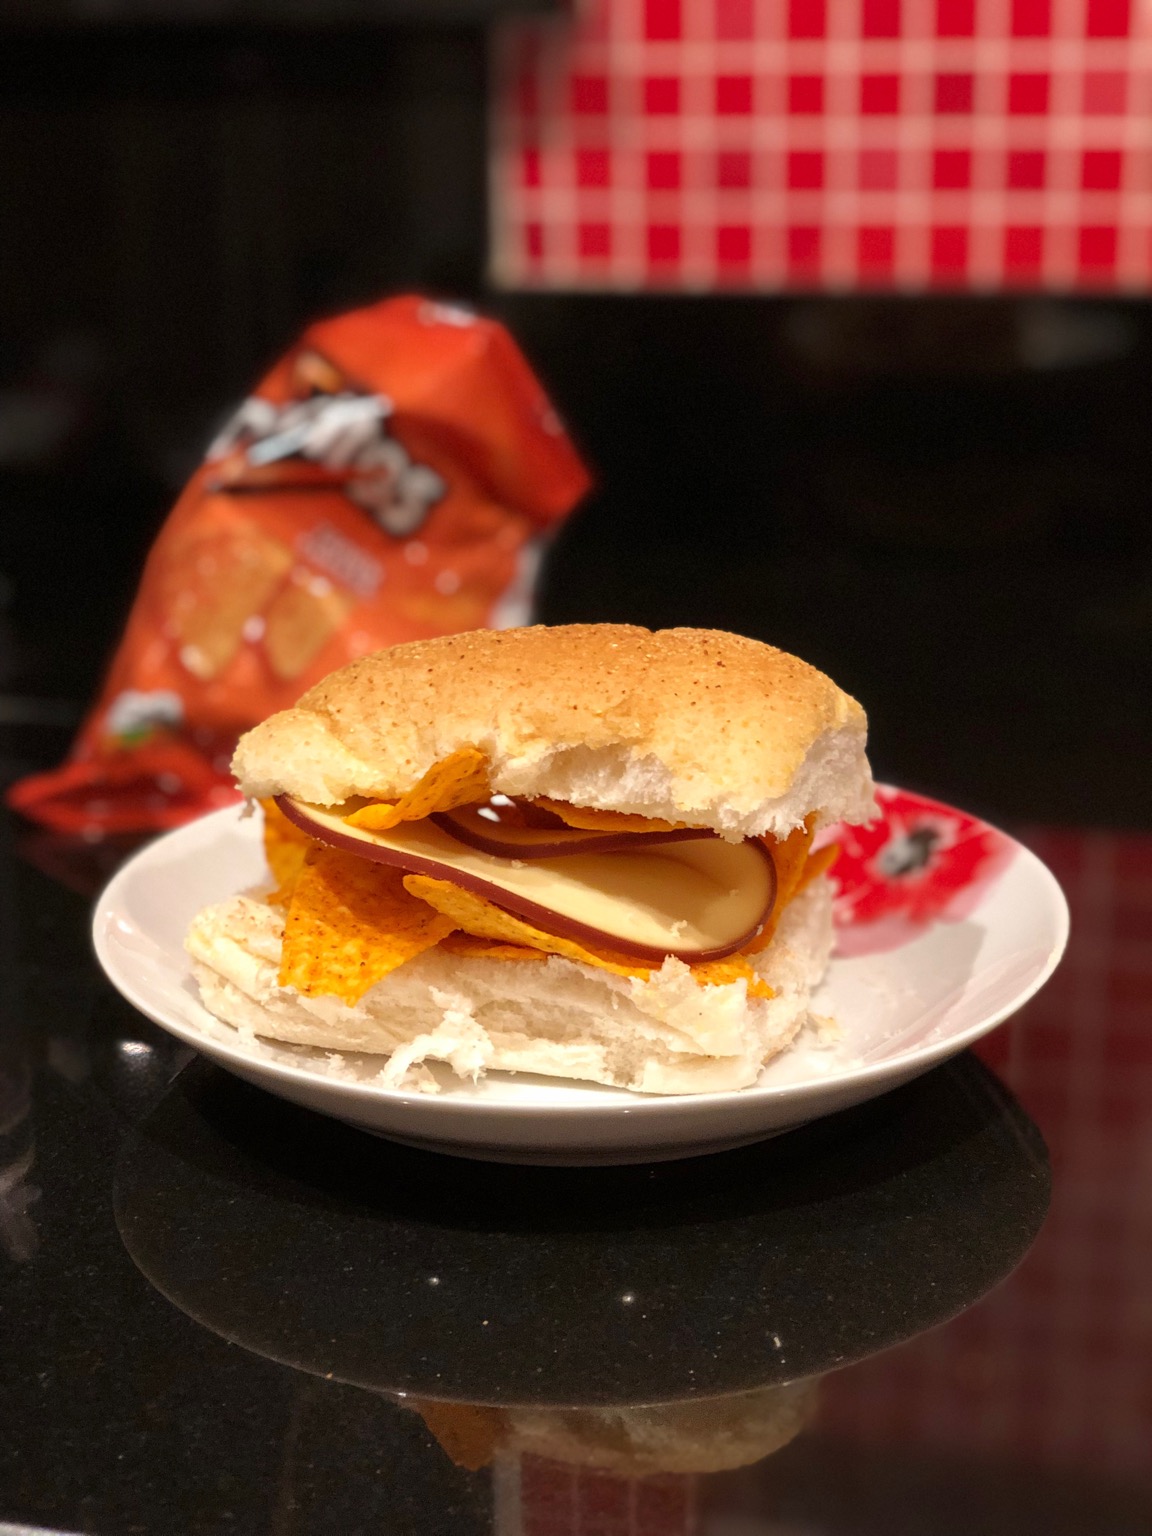 White roll containing Doritos and cheese